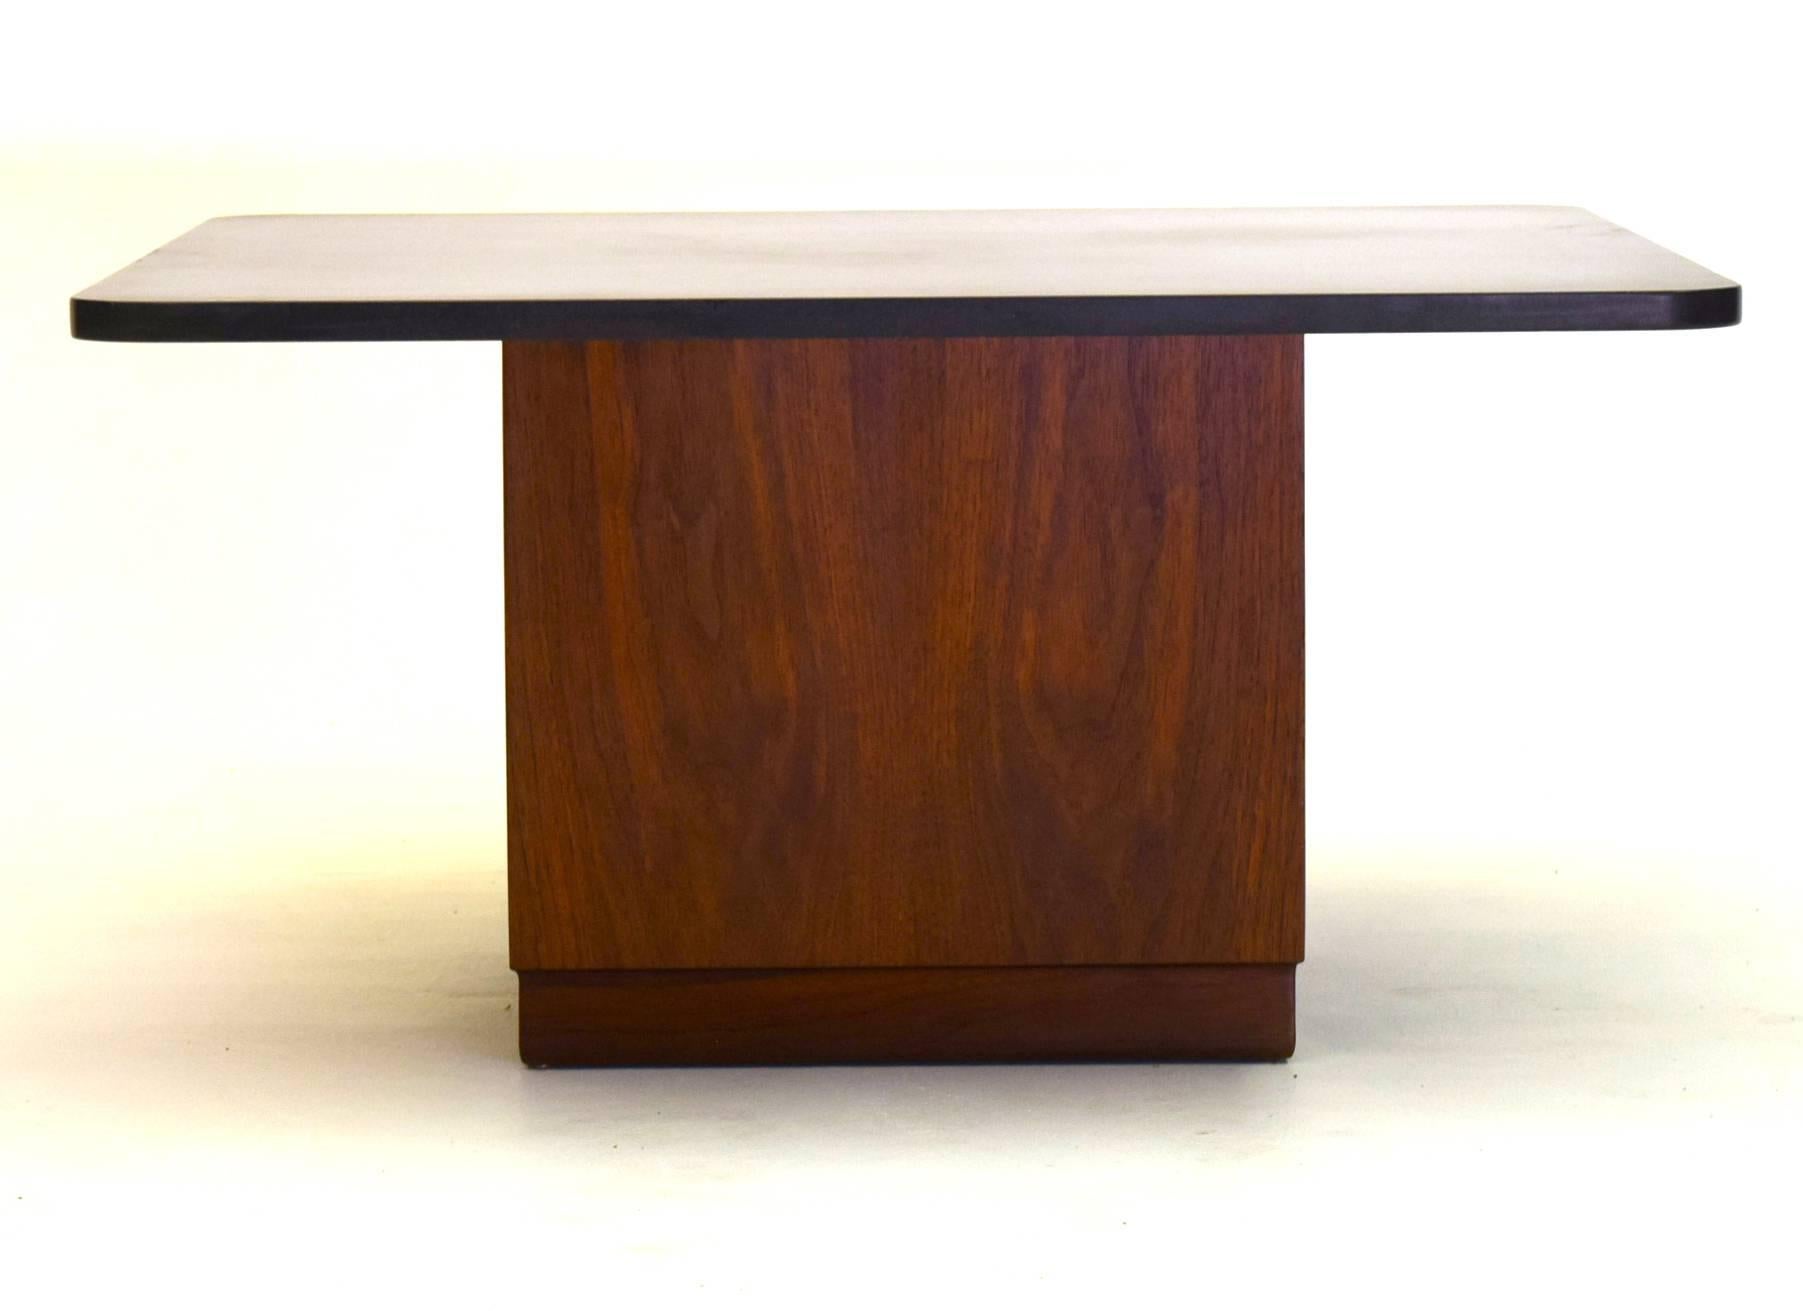 Produced in the 1960s and in near perfect condition we offer this ideal table by architect Fred Kemp of St. Louis who was a specialist with Minimalist designs.

Measures 16